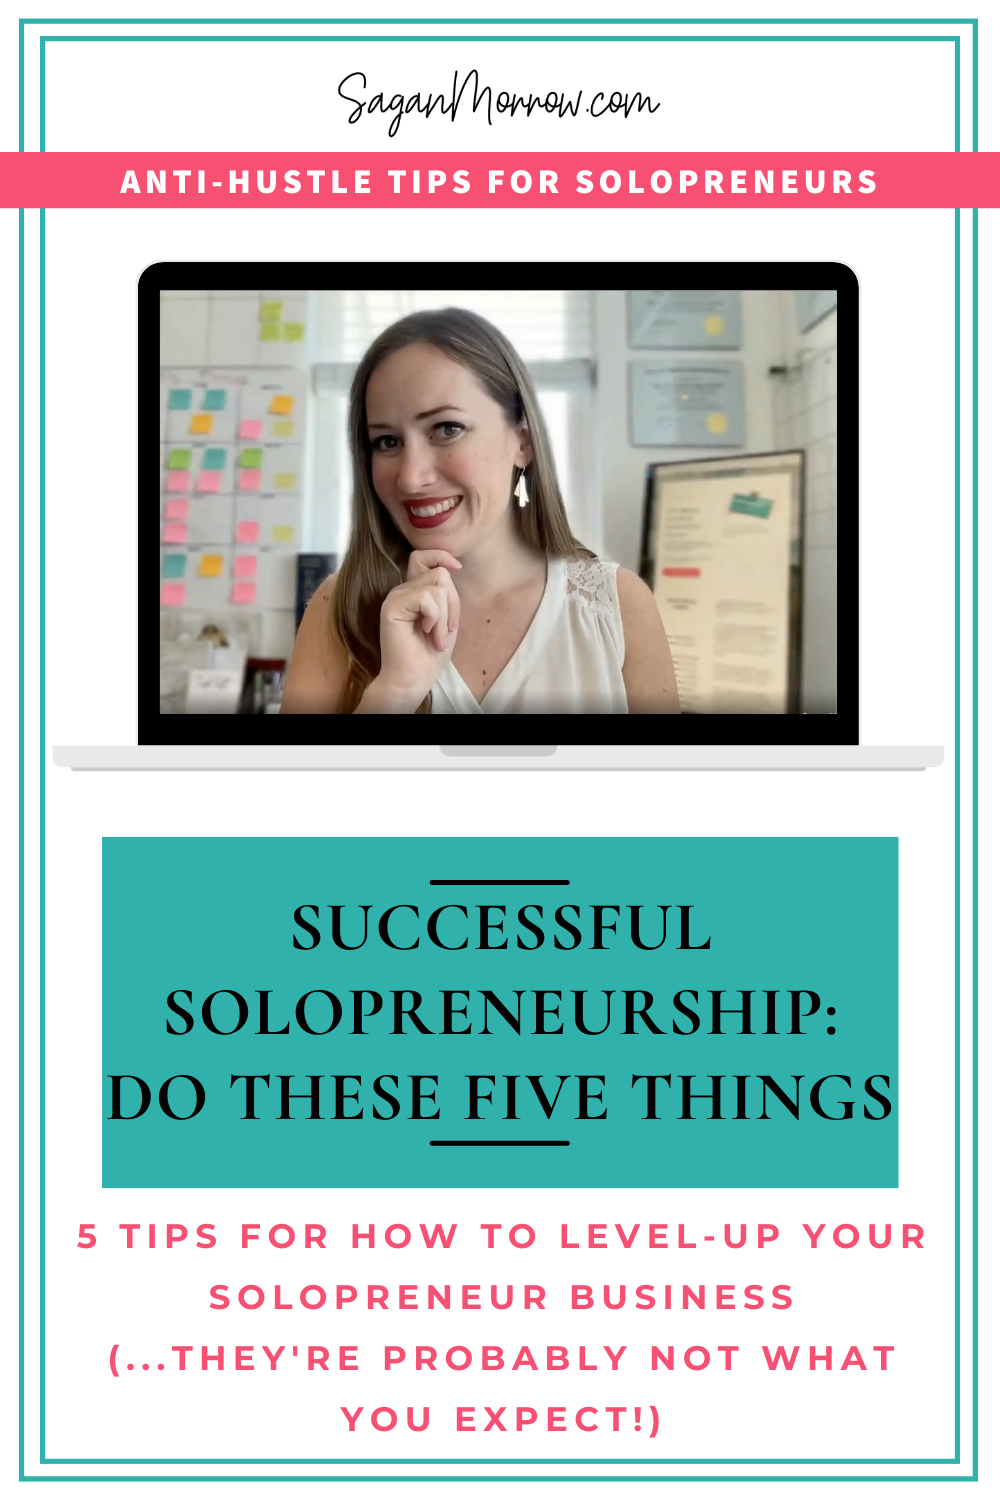 how to be a successful solopreneur, do these top 5 things